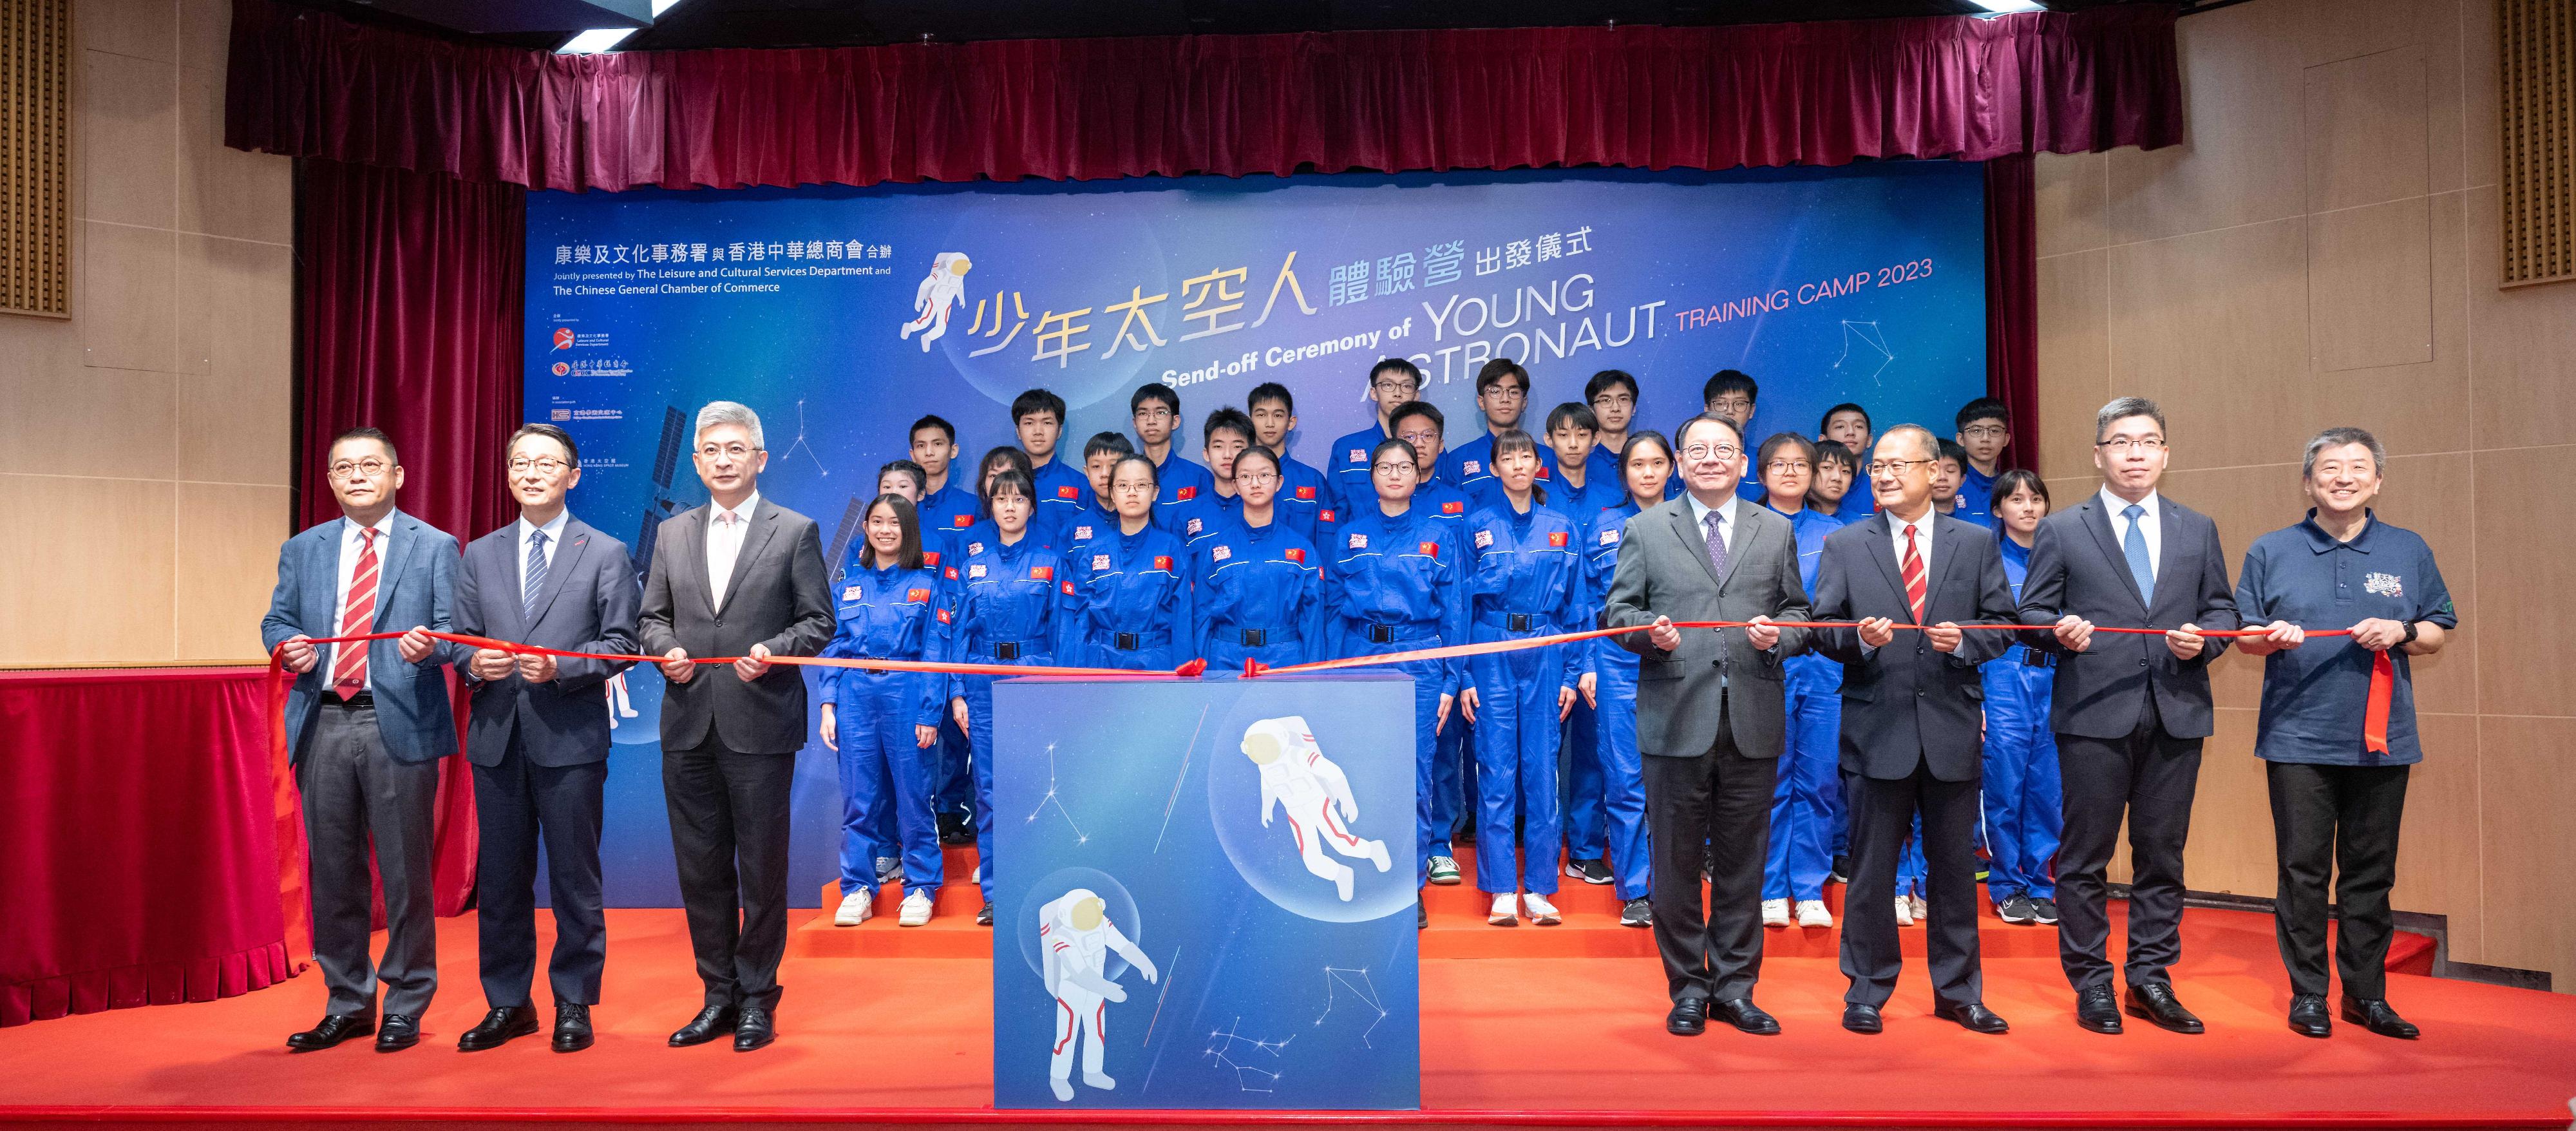 A send-off ceremony for the Young Astronaut Training Camp 2023 was held at the Hong Kong Space Museum today (July 25). Photo shows (front row, from left) Vice-Chairman of the Chinese General Chamber of Commerce Mr Ricky Tsang; the Director of Leisure and Cultural Services, Mr Vincent Liu; the Acting Secretary for Culture, Sports and Tourism, Mr Raistlin Lau; the Chief Secretary for Administration, Mr Chan Kwok-ki; the Chairman of the Chinese General Chamber of Commerce, Dr Jonathan Choi; the President of the Beijing-Hong Kong Academic Exchange Centre, Mr Hsu Hoi-shan; and the Museum Director of the Hong Kong Science Museum, Mr Lawrence Lee. 